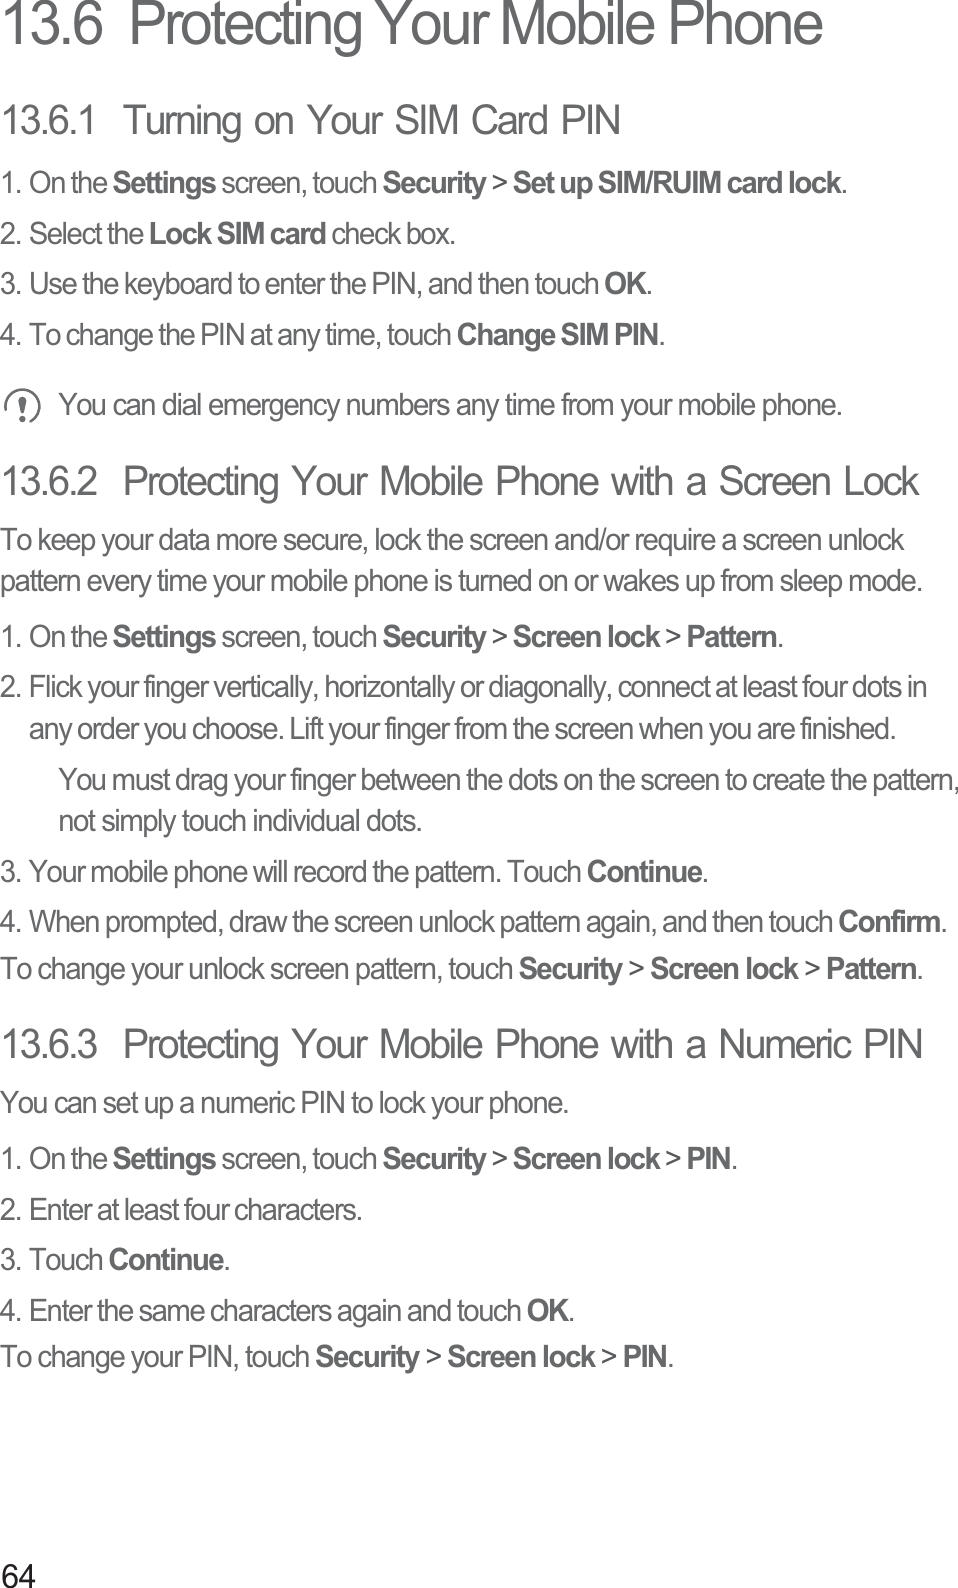 6413.6  Protecting Your Mobile Phone13.6.1  Turning on Your SIM Card PIN1. On the Settings screen, touch Security &gt; Set up SIM/RUIM card lock.2. Select the Lock SIM card check box.3. Use the keyboard to enter the PIN, and then touch OK.4. To change the PIN at any time, touch Change SIM PIN. You can dial emergency numbers any time from your mobile phone.13.6.2  Protecting Your Mobile Phone with a Screen LockTo keep your data more secure, lock the screen and/or require a screen unlock pattern every time your mobile phone is turned on or wakes up from sleep mode.1. On the Settings screen, touch Security &gt; Screen lock &gt; Pattern.2. Flick your finger vertically, horizontally or diagonally, connect at least four dots in any order you choose. Lift your finger from the screen when you are finished.You must drag your finger between the dots on the screen to create the pattern, not simply touch individual dots.3. Your mobile phone will record the pattern. Touch Continue.4. When prompted, draw the screen unlock pattern again, and then touch Confirm.To change your unlock screen pattern, touch Security &gt; Screen lock &gt; Pattern.13.6.3  Protecting Your Mobile Phone with a Numeric PINYou can set up a numeric PIN to lock your phone.1. On the Settings screen, touch Security &gt; Screen lock &gt; PIN.2. Enter at least four characters.3. Touch Continue.4. Enter the same characters again and touch OK.To change your PIN, touch Security &gt; Screen lock &gt; PIN.